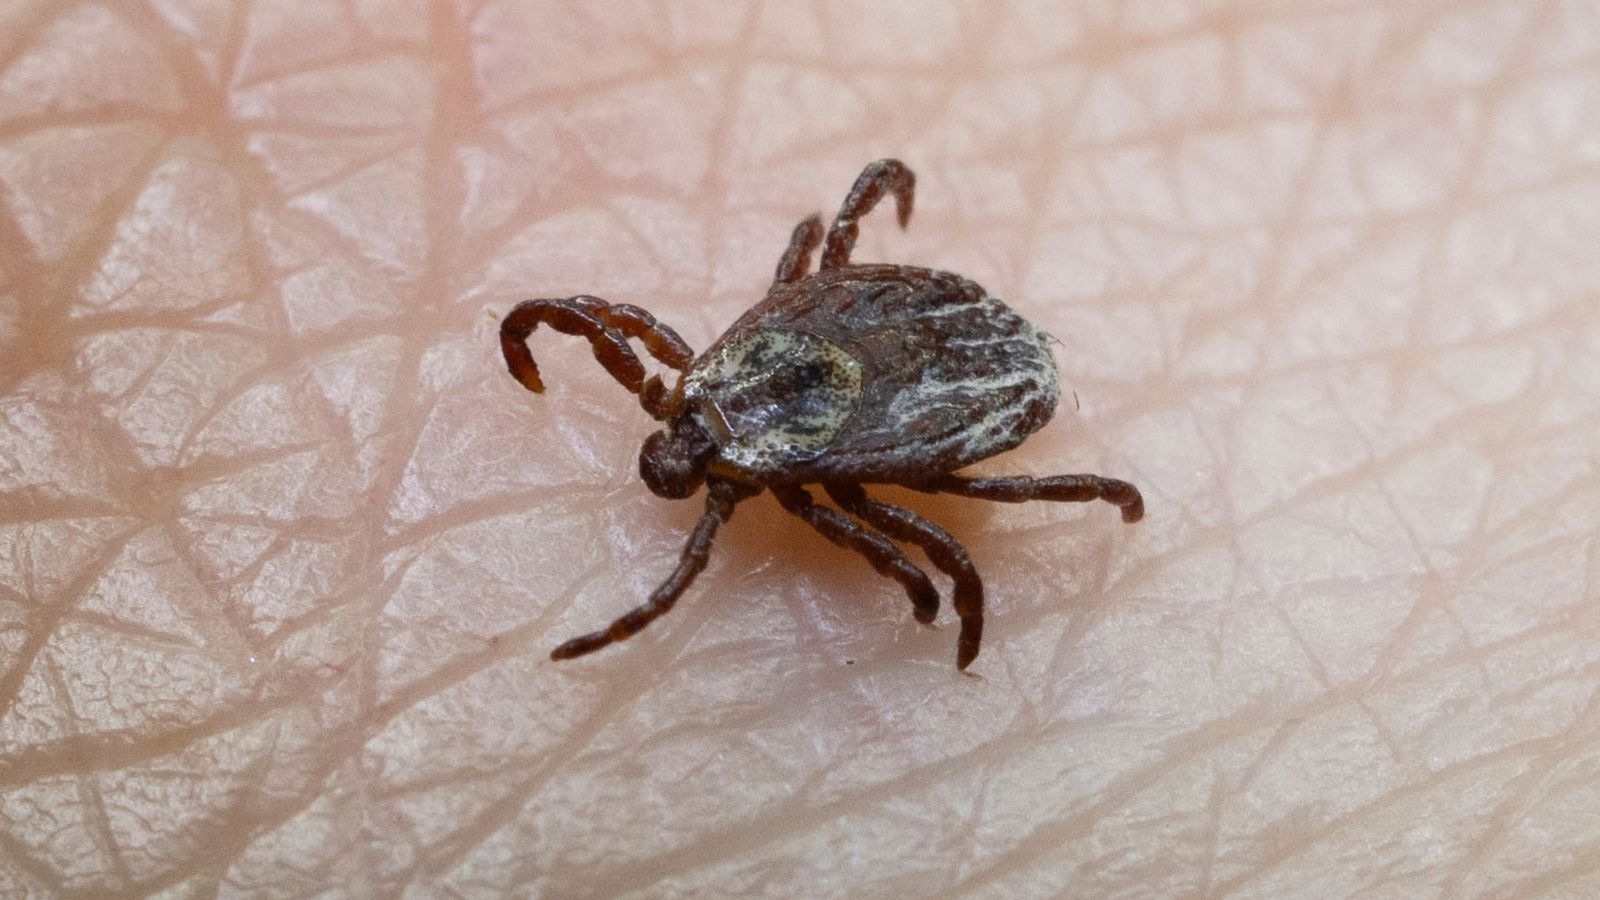 Climate change could cause spike in ticks - and drive up Lyme disease cases